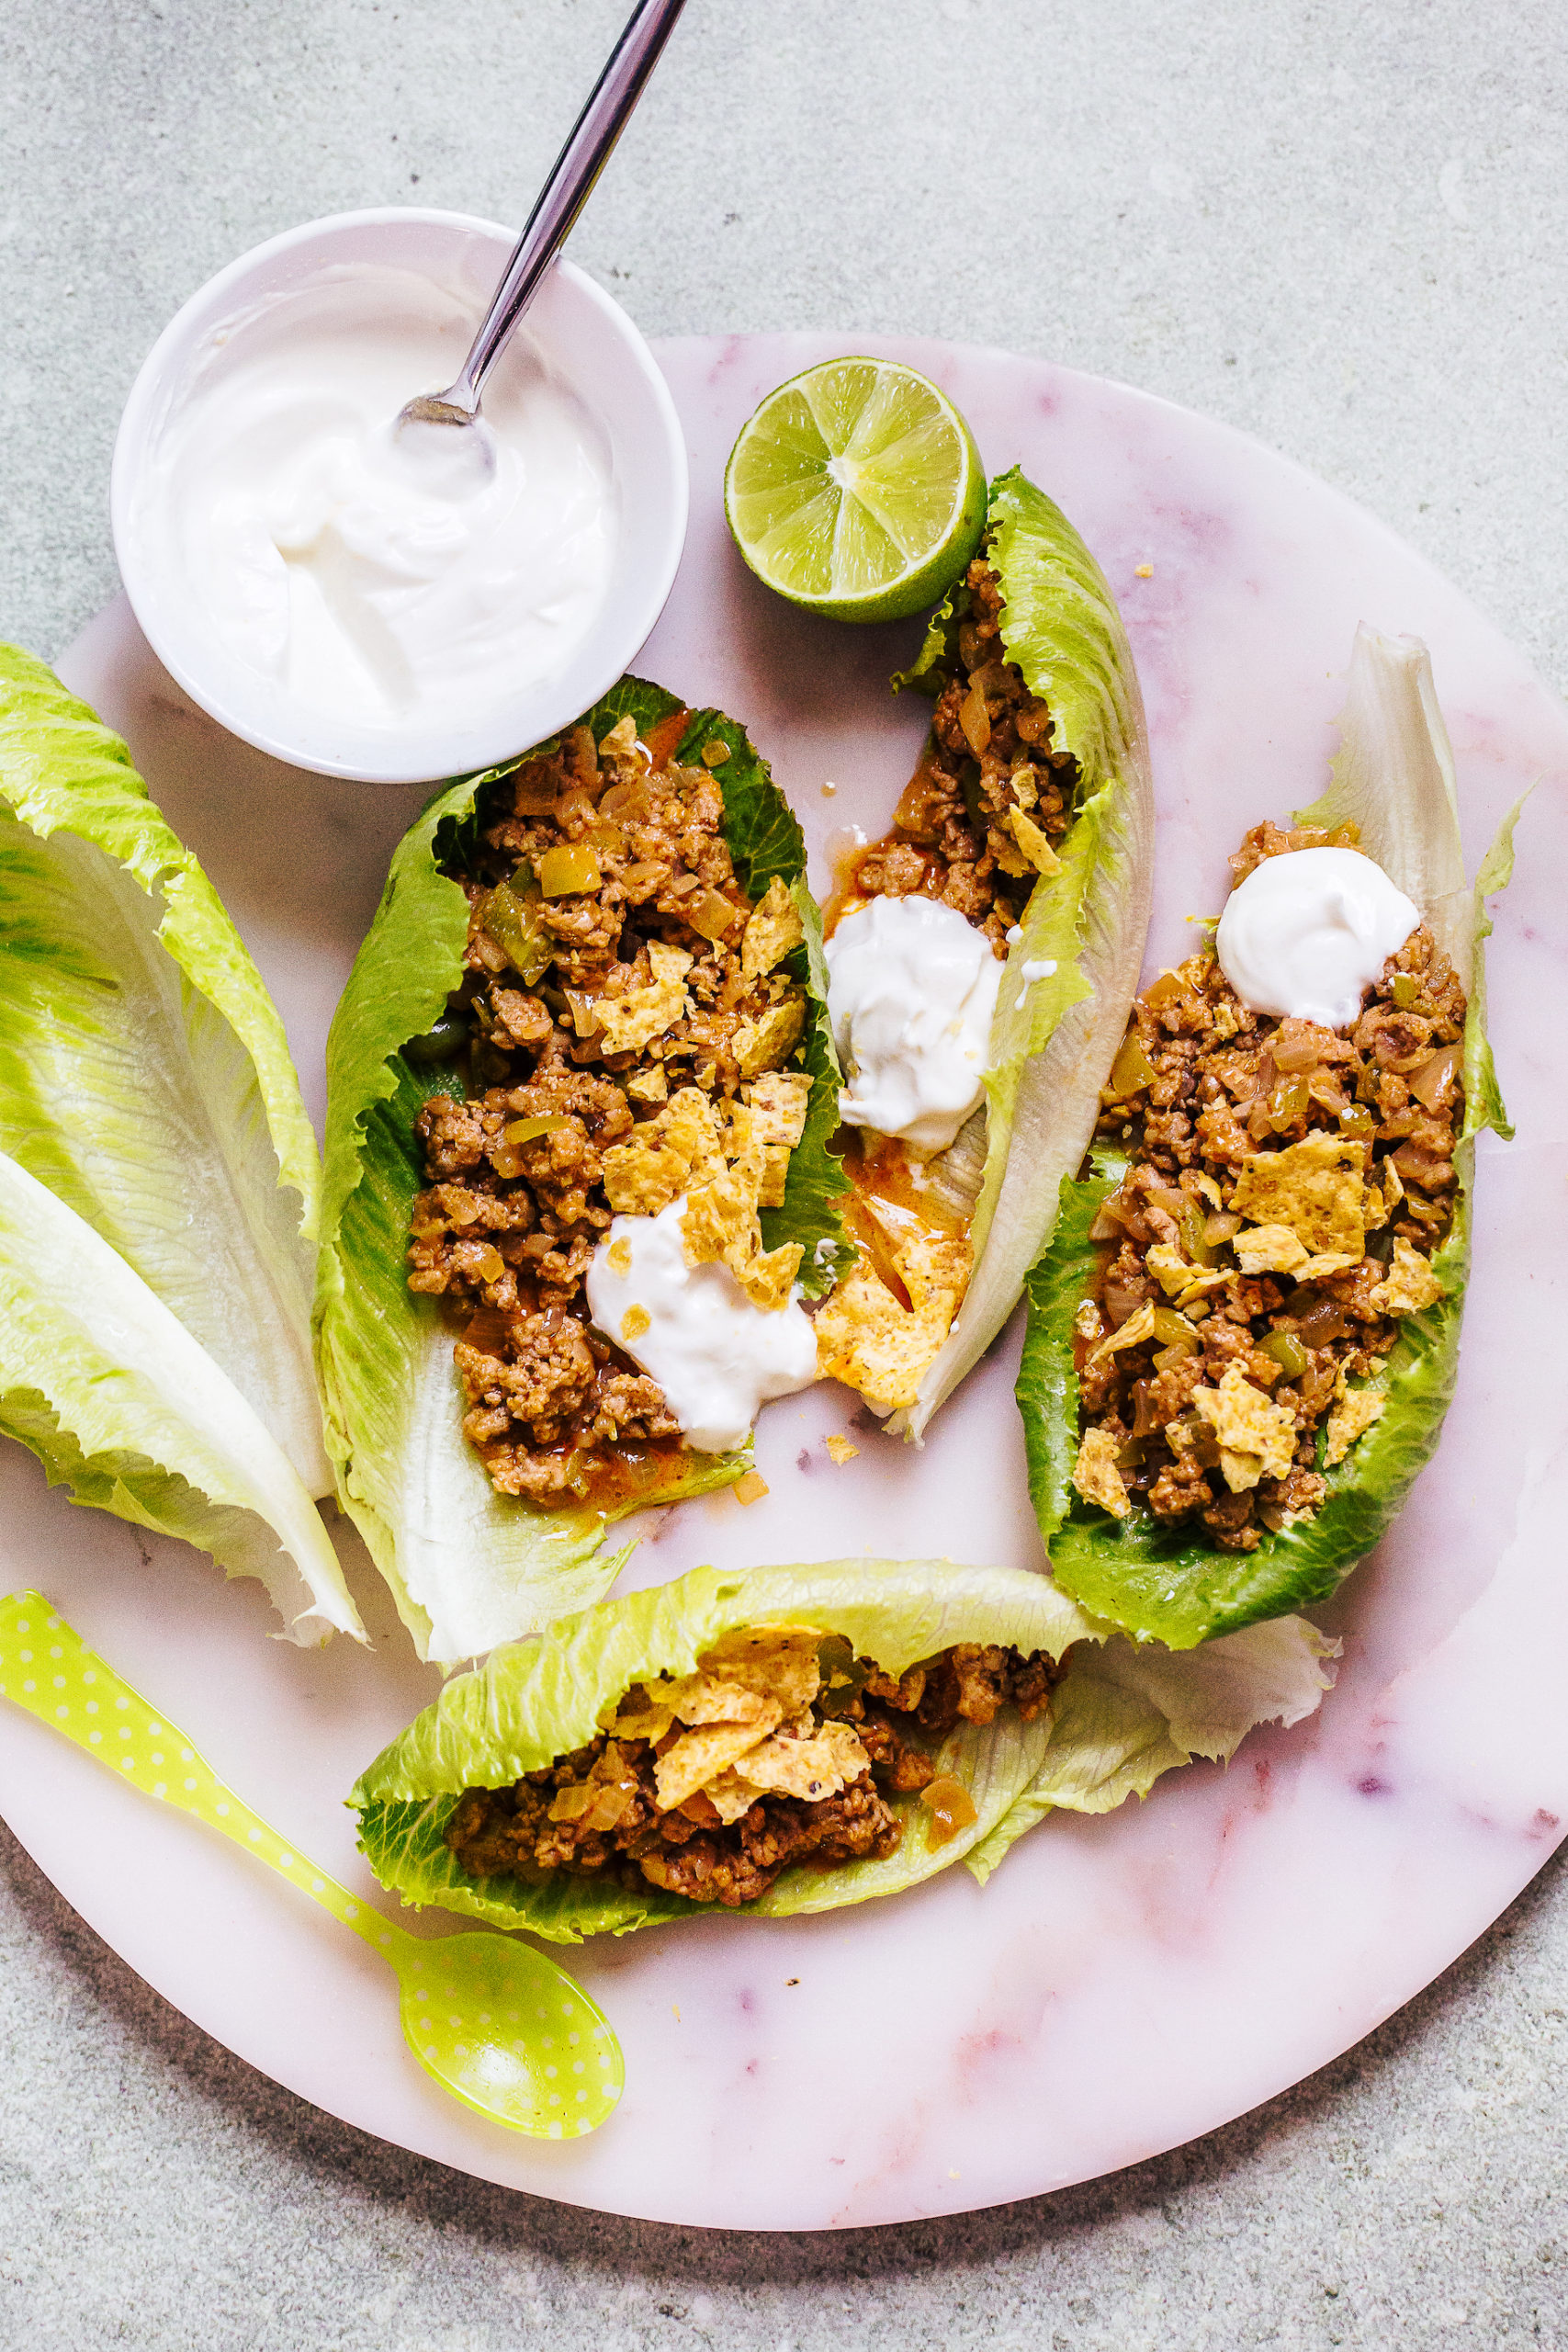 Saucy Southwestern Lettuce Wraps (with smoked cheddar and salted lime cream)